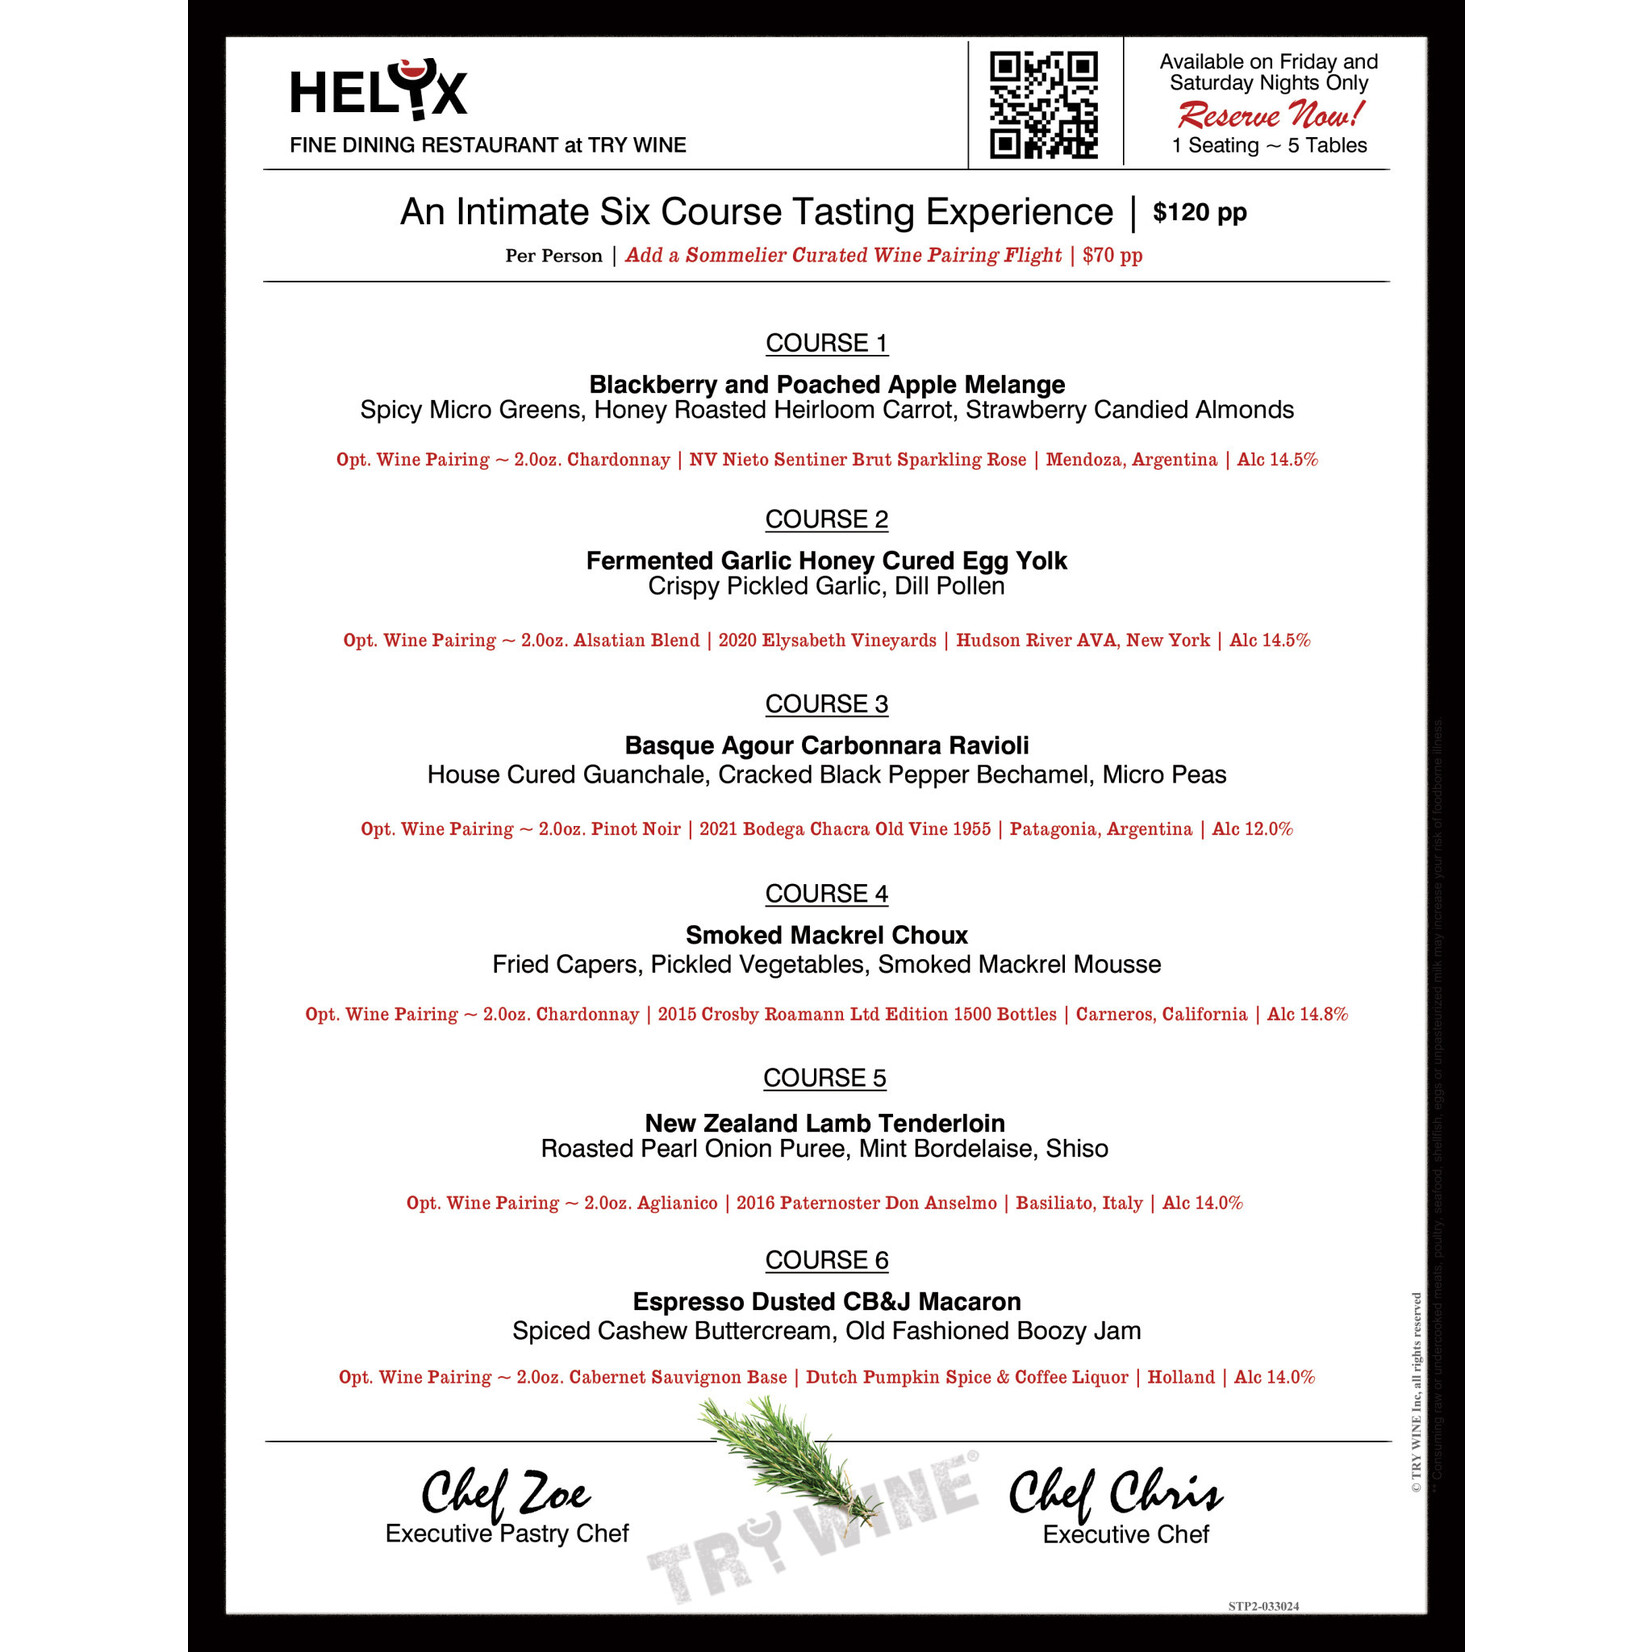 NEW ~ HELYX Restaurant 6 Course Tasting Experience ~ Friday May 3rd at 8:00pm ~ per person